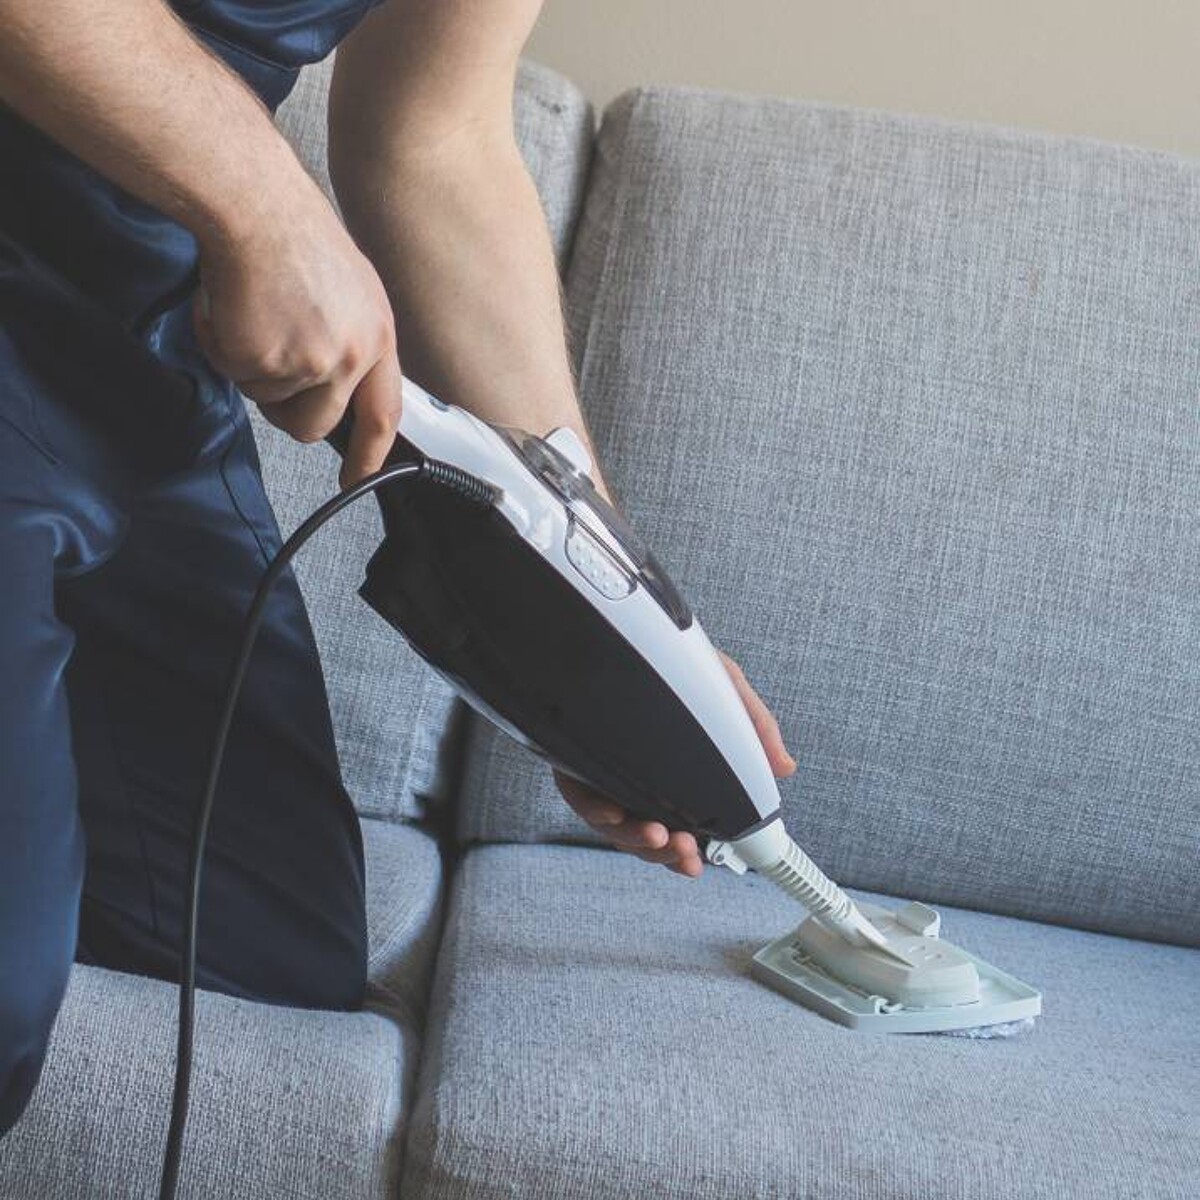 How Much Does Upholstery Cleaning Cost? [2024 Data]